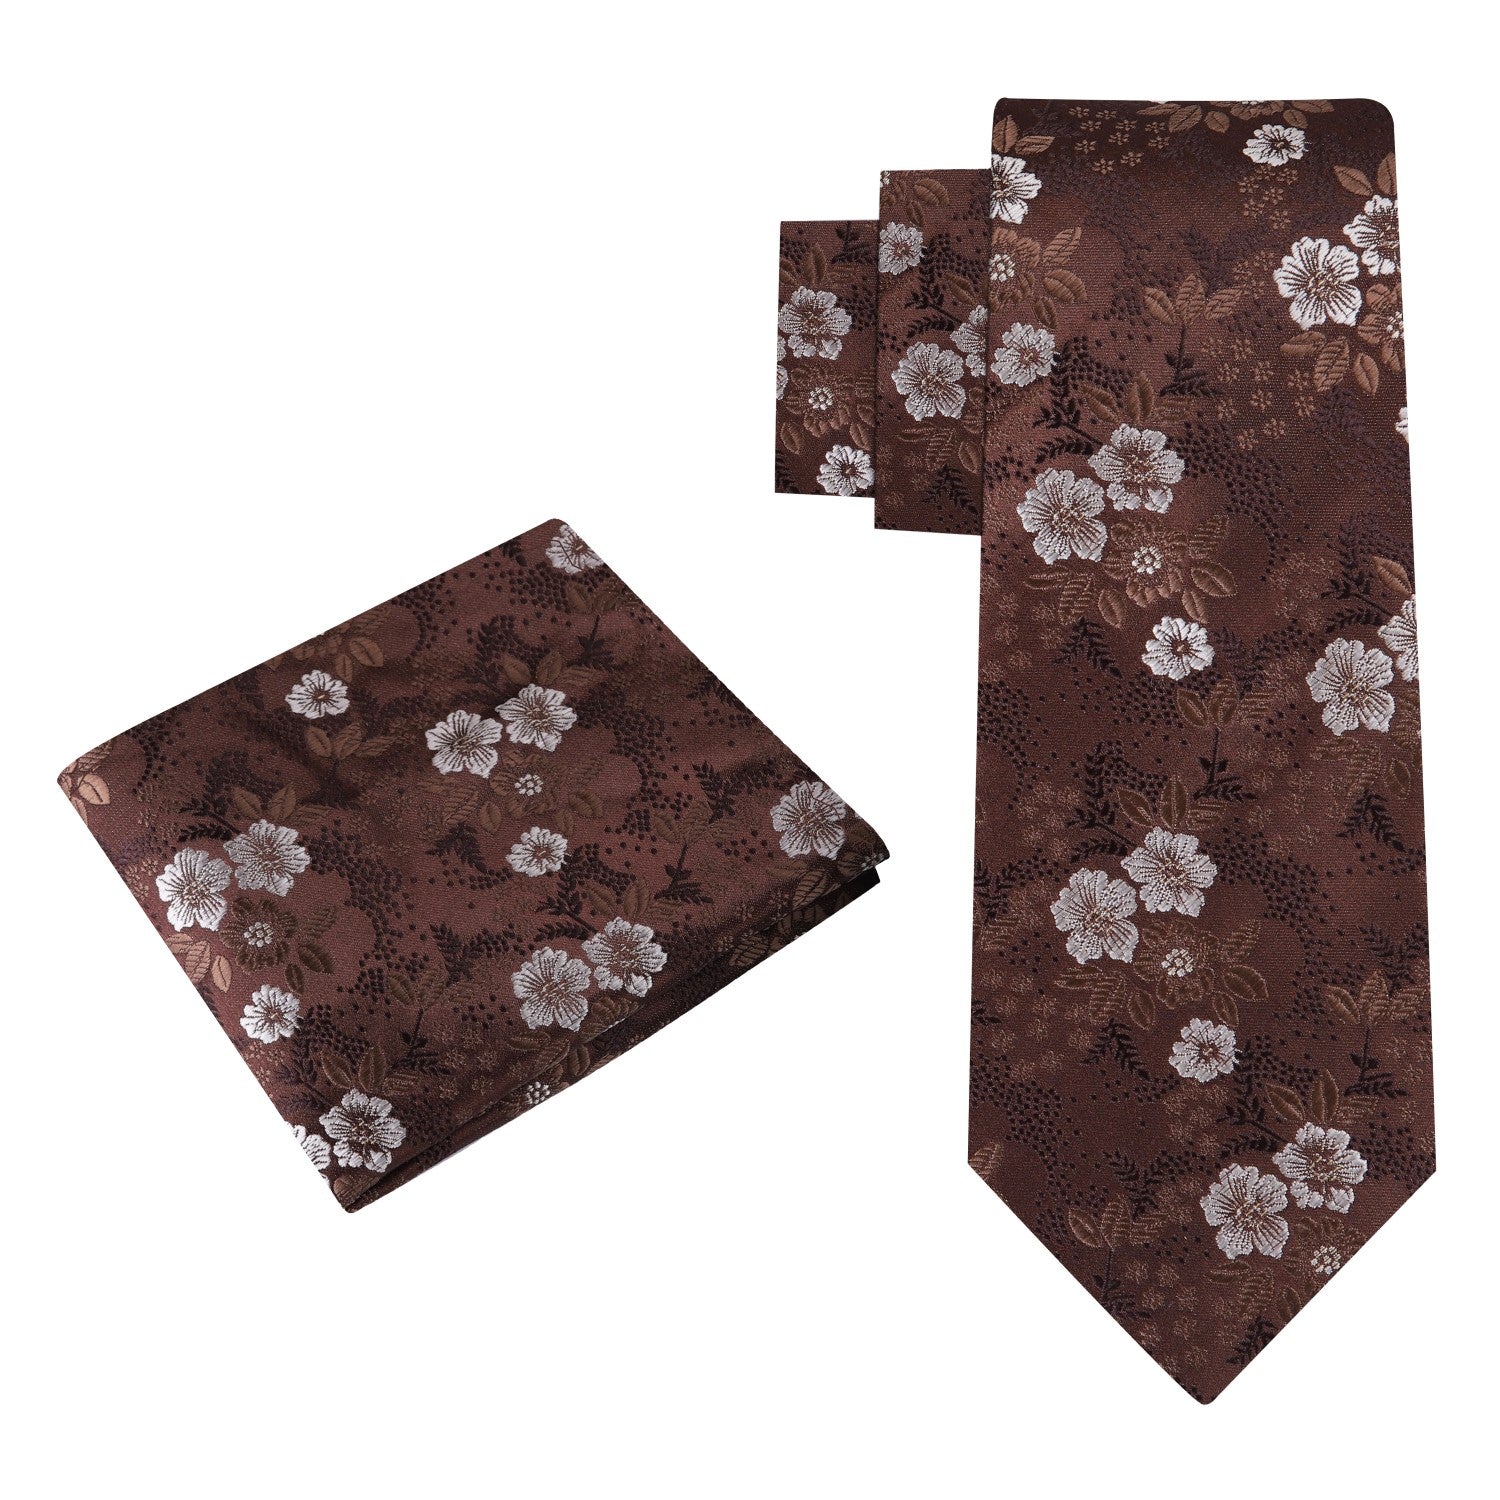 View 2:Shades of Brown Floral Tie and Matching Square